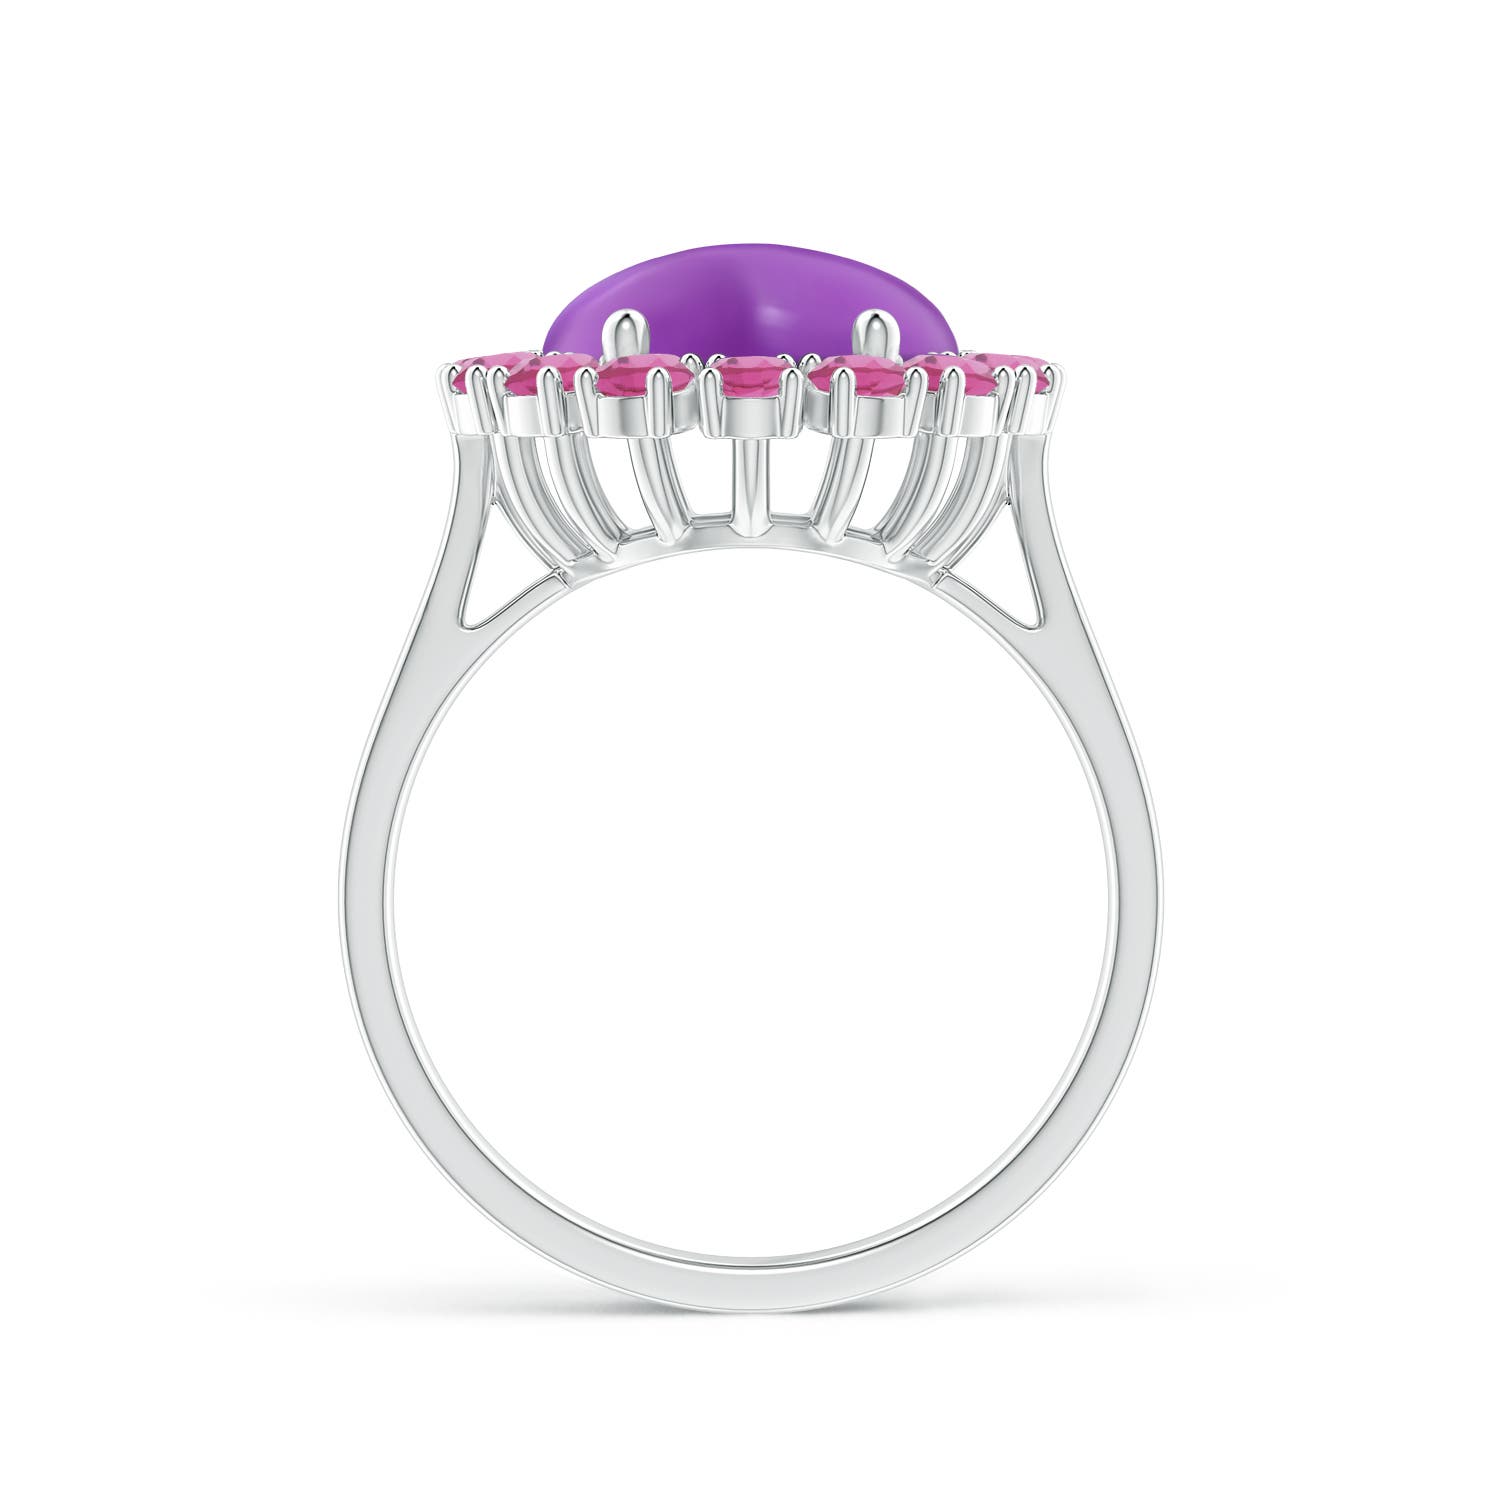 AAA - Amethyst / 7.26 CT / 14 KT White Gold